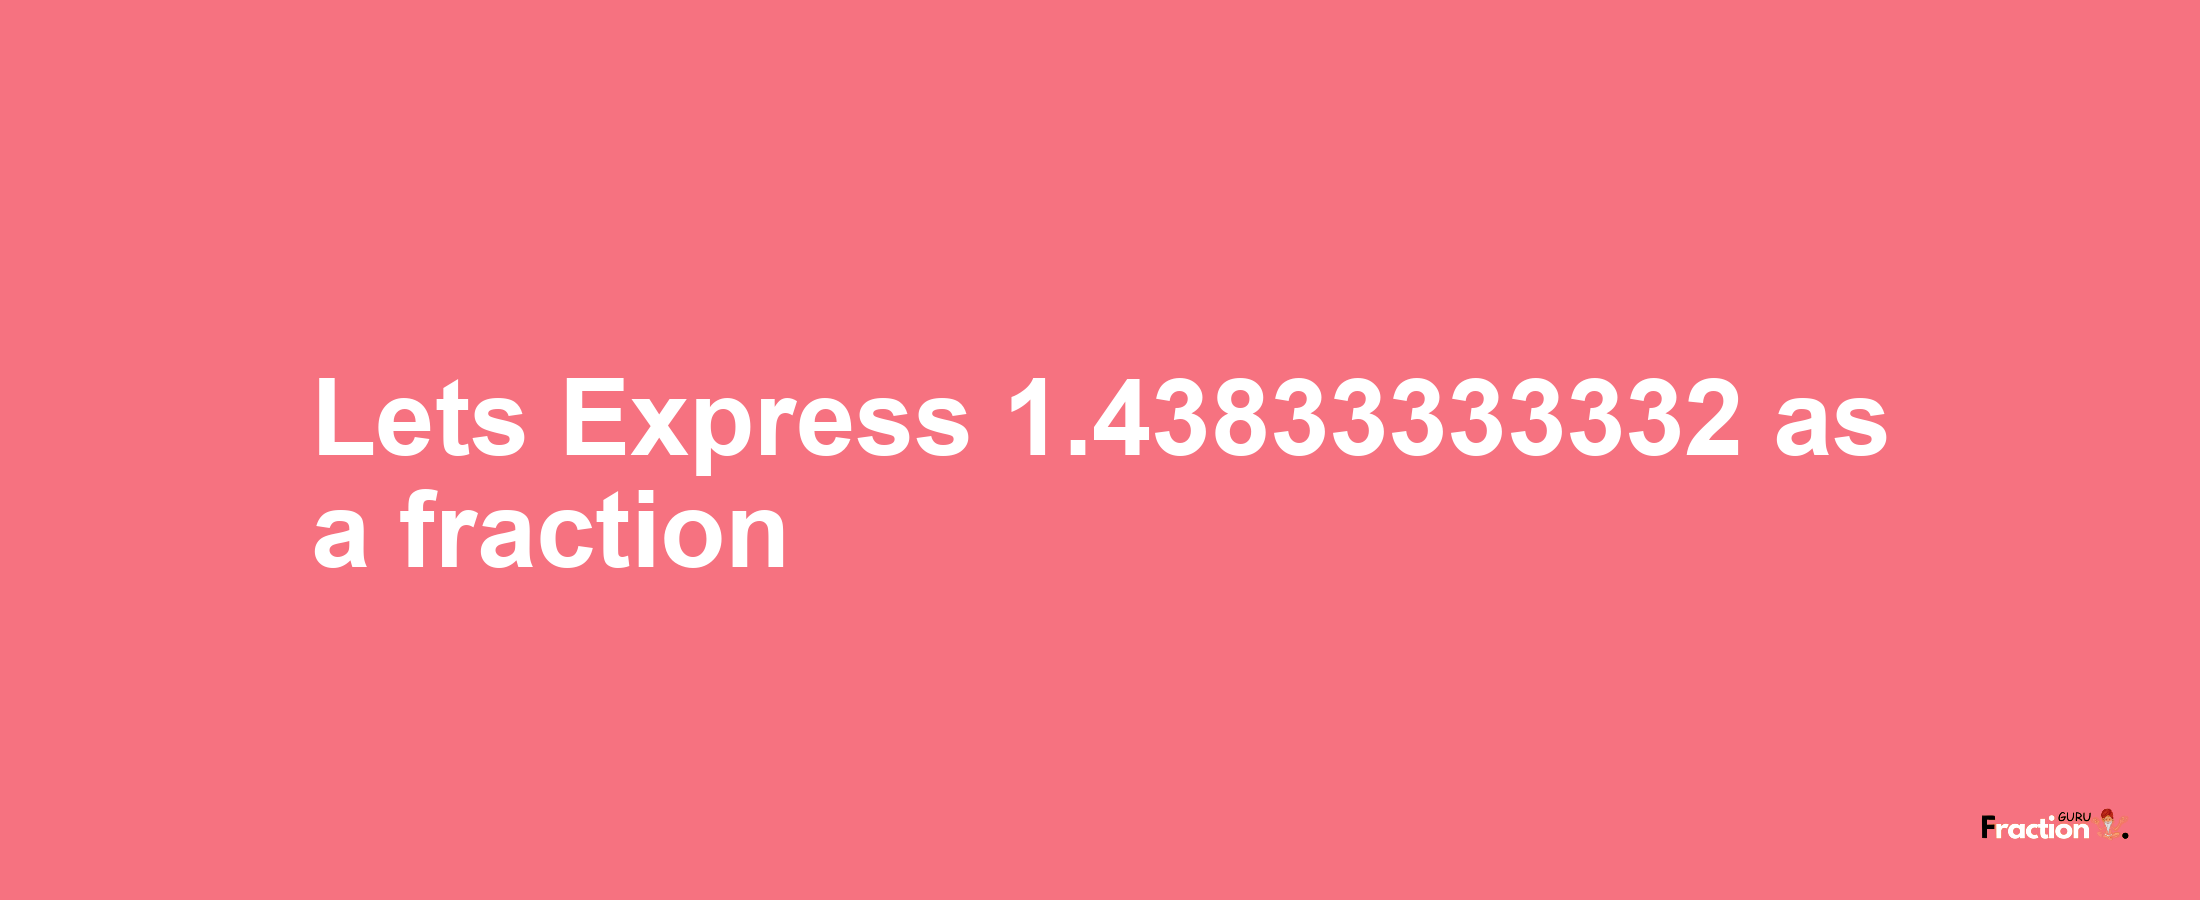 Lets Express 1.43833333332 as afraction